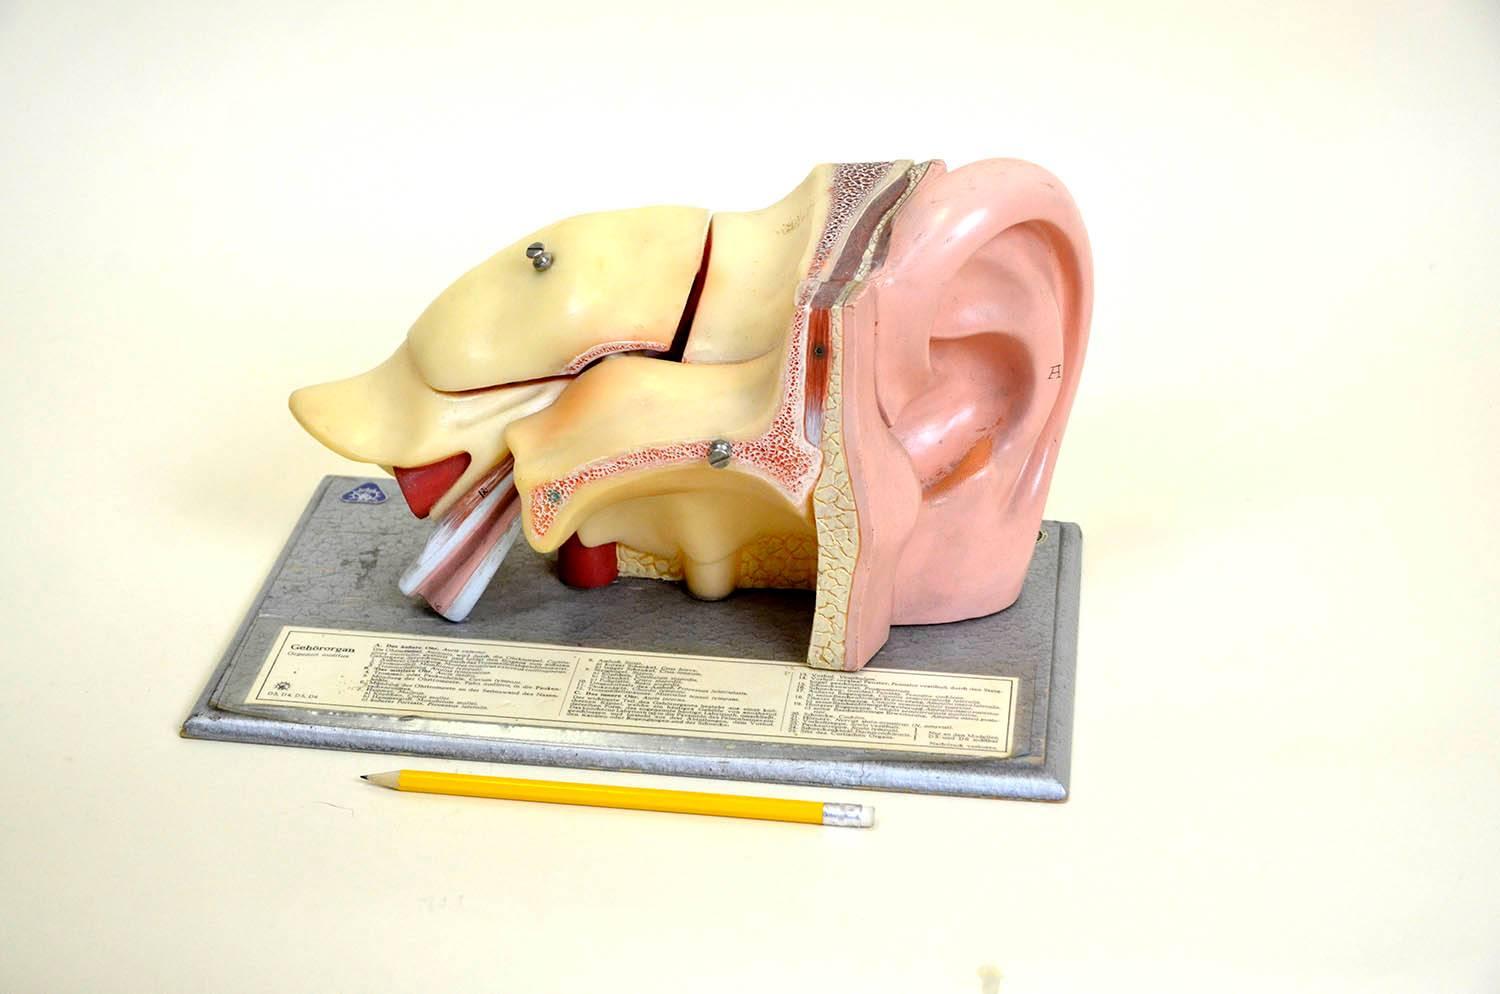 This example of vintage anatomical ear model (Gehörorgan) was realized in the 1960s by Somso-Werkstätten in Sonneberg (Thüringia) In Germany.

The model, realized in plastic, can be dissemble with six detachable parts (the petros portion of the